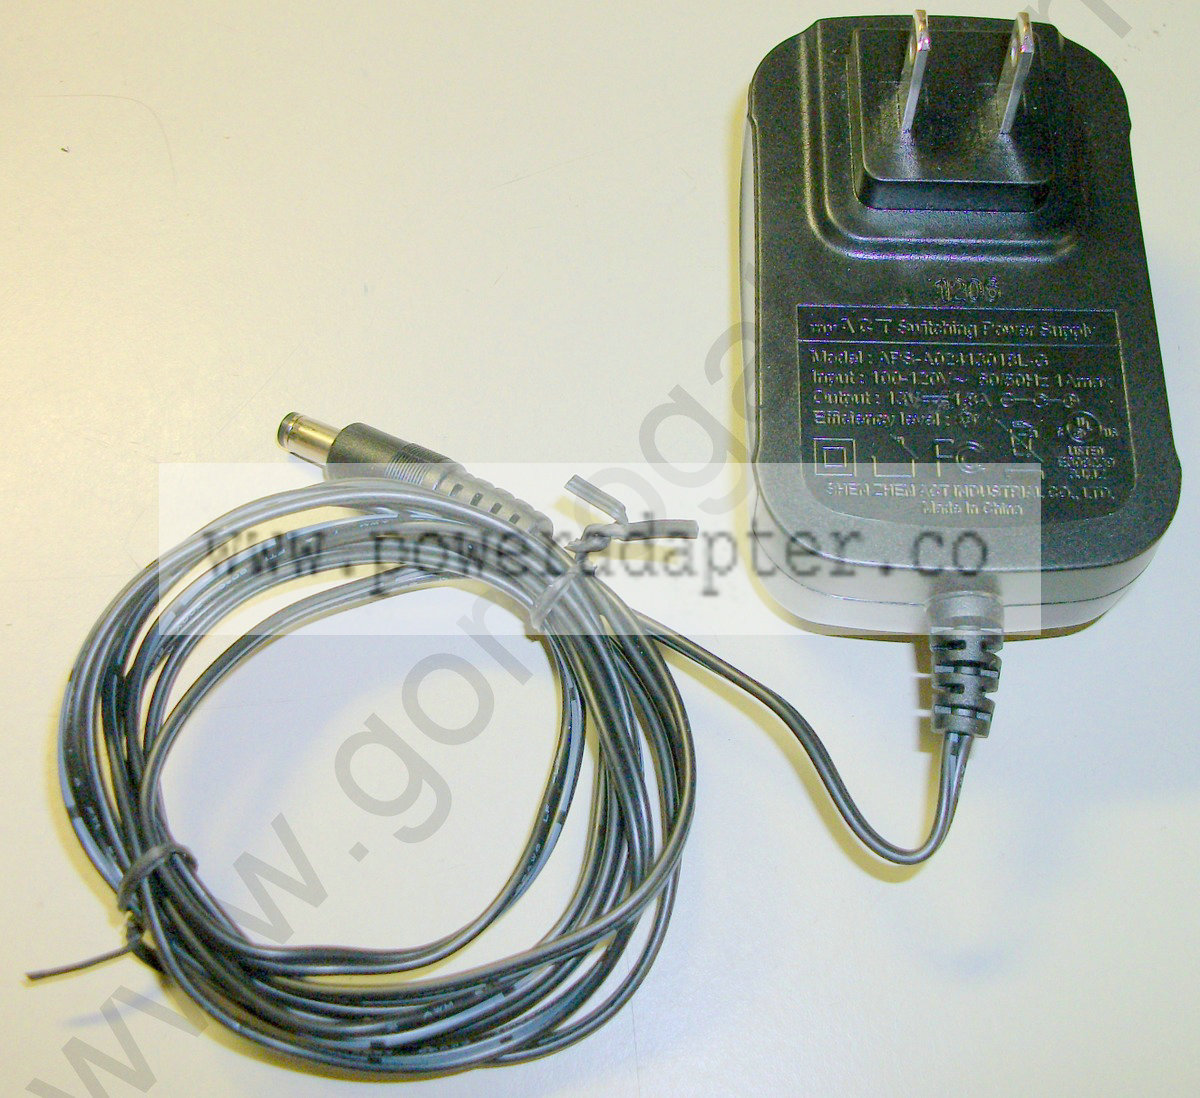 MyACT Switching Power Supply 13V DC - AC Adapter [APS-A1241301] Input: 100-120VAC 50/60Hz 1A max Output: 13VDC 1.8A Mo - Click Image to Close